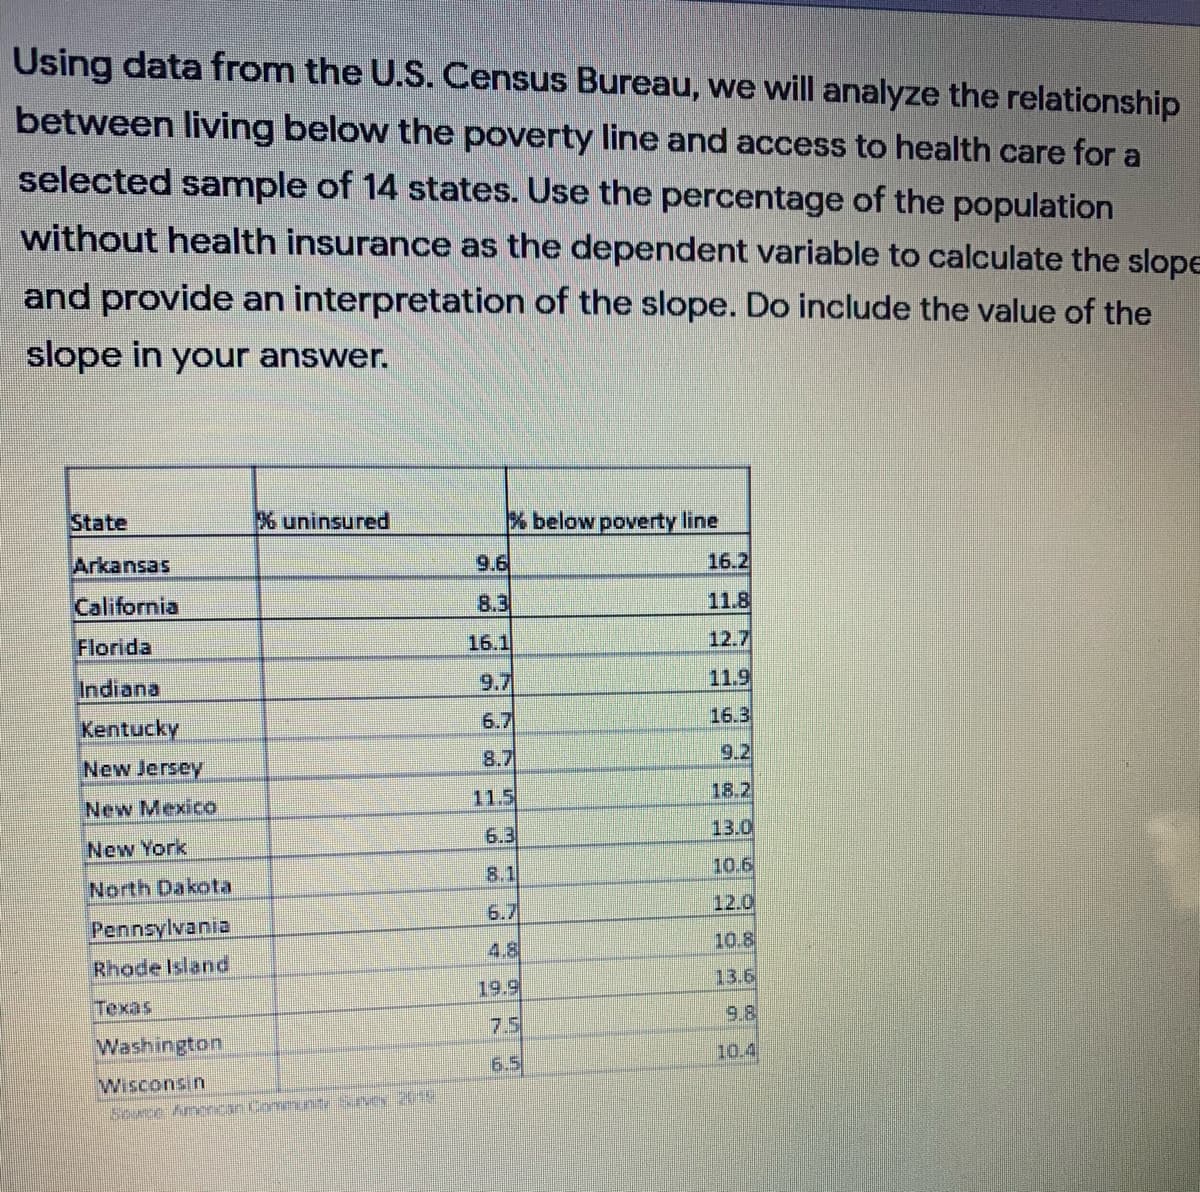 Using data from the U.S. Census Bureau, we will analyze the relationship
between living below the poverty line and access to health care for a
selected sample of 14 states. Use the percentage of the population
without health insurance as the dependent variable to calculate the slope
and provide an interpretation of the slope. Do include the value of the
slope in your answer.
State
% uninsured
% below poverty line
Arkansas
9.6
16.2
California
8.3
11.8
Florida
16.1
12.7
Indiana
9.7
11.9
Kentucky
6.7
16.3
8.7
9.2
New Jersey
11.5
18.2
New Mexico
6.3
13.0
New York
8.1
10.6
North Dakota
12.0
6.7
Pennsylvania
10.8
4.8
Rhode Island
13.6
19.9
Texas
9.8
7.5
Washington
10.4
6.5
Wisconsin
Soece AmercanCommunt ivex 2019
